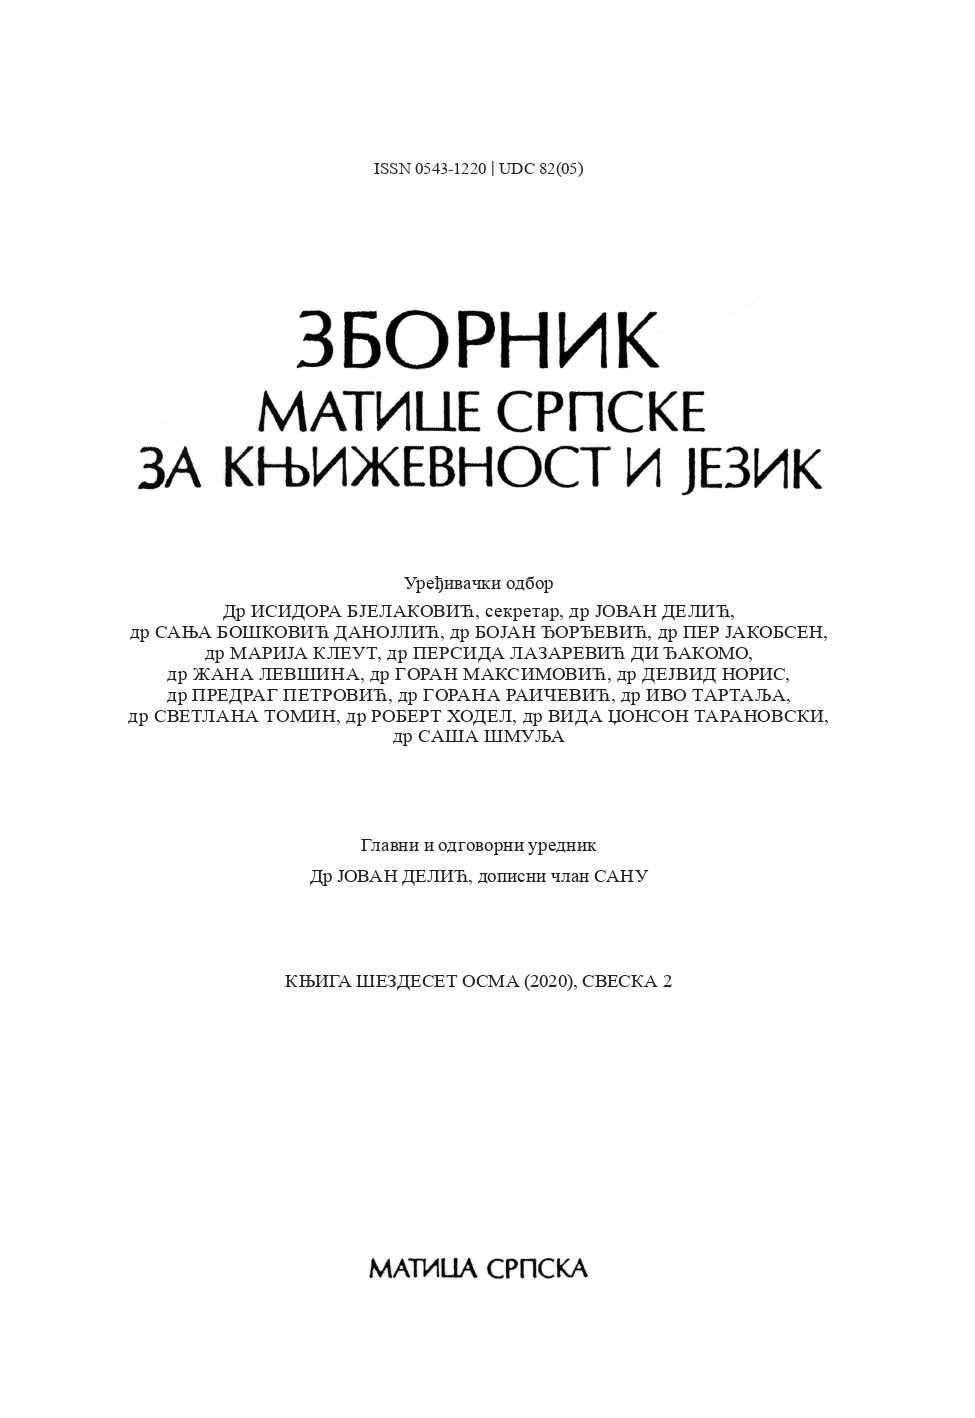 MISSION "OF THE CHRONICLE OF MATICA SRPSKA IN SOFIA AND ROME: LETTERS OF JOVAN DUČIĆ TO TIHOMIR OSTOJIĆ Cover Image